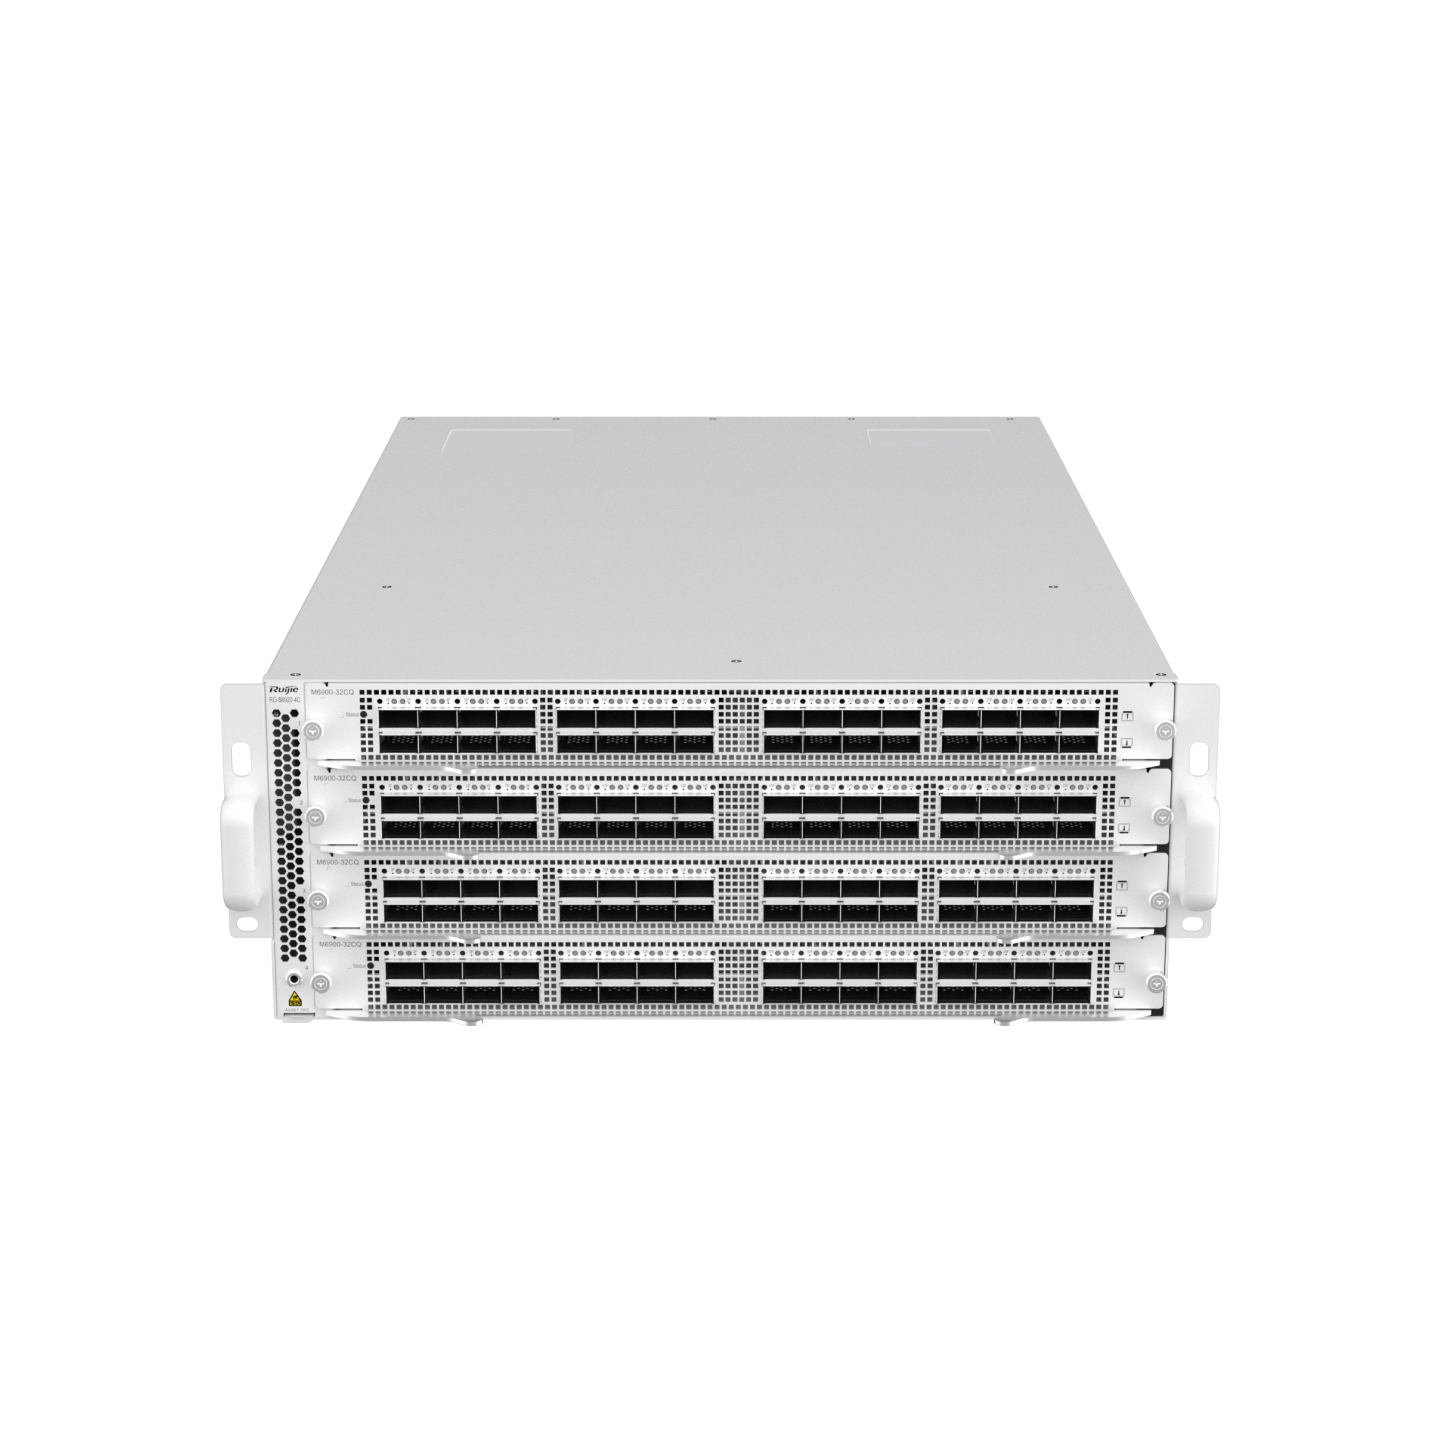 RG-S6920-4C – Next-Generation Data Center 100GE Switch with 100GE/400GE Line Cards